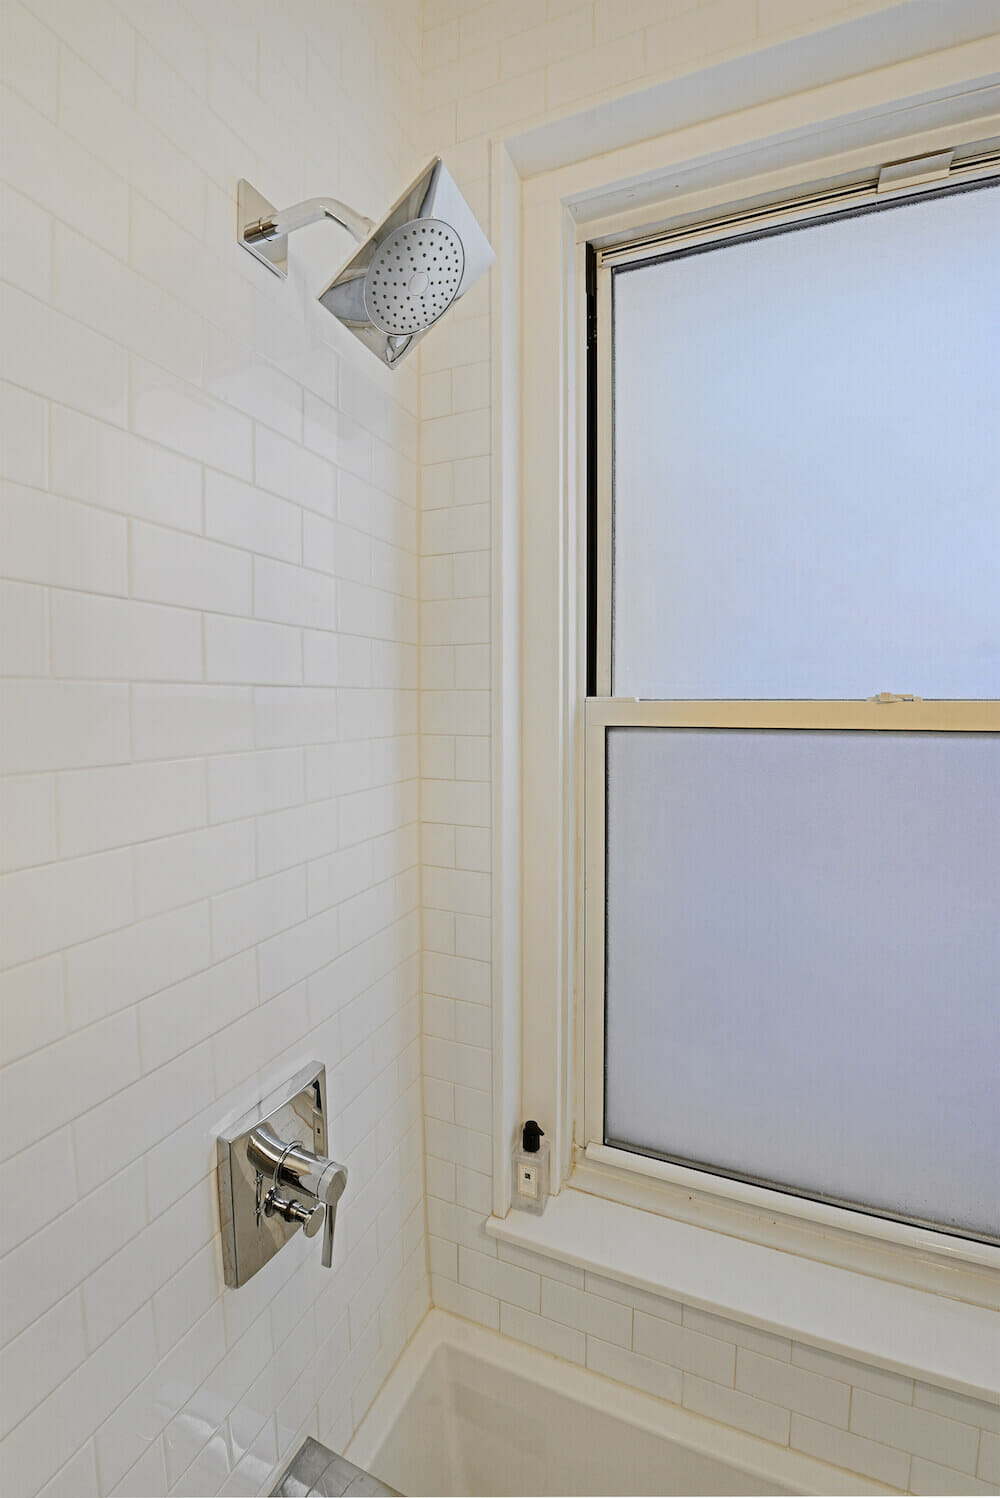 White bathroom with subway tiles and double hung mirror on window ledge and nickel coated showerhead after renovation